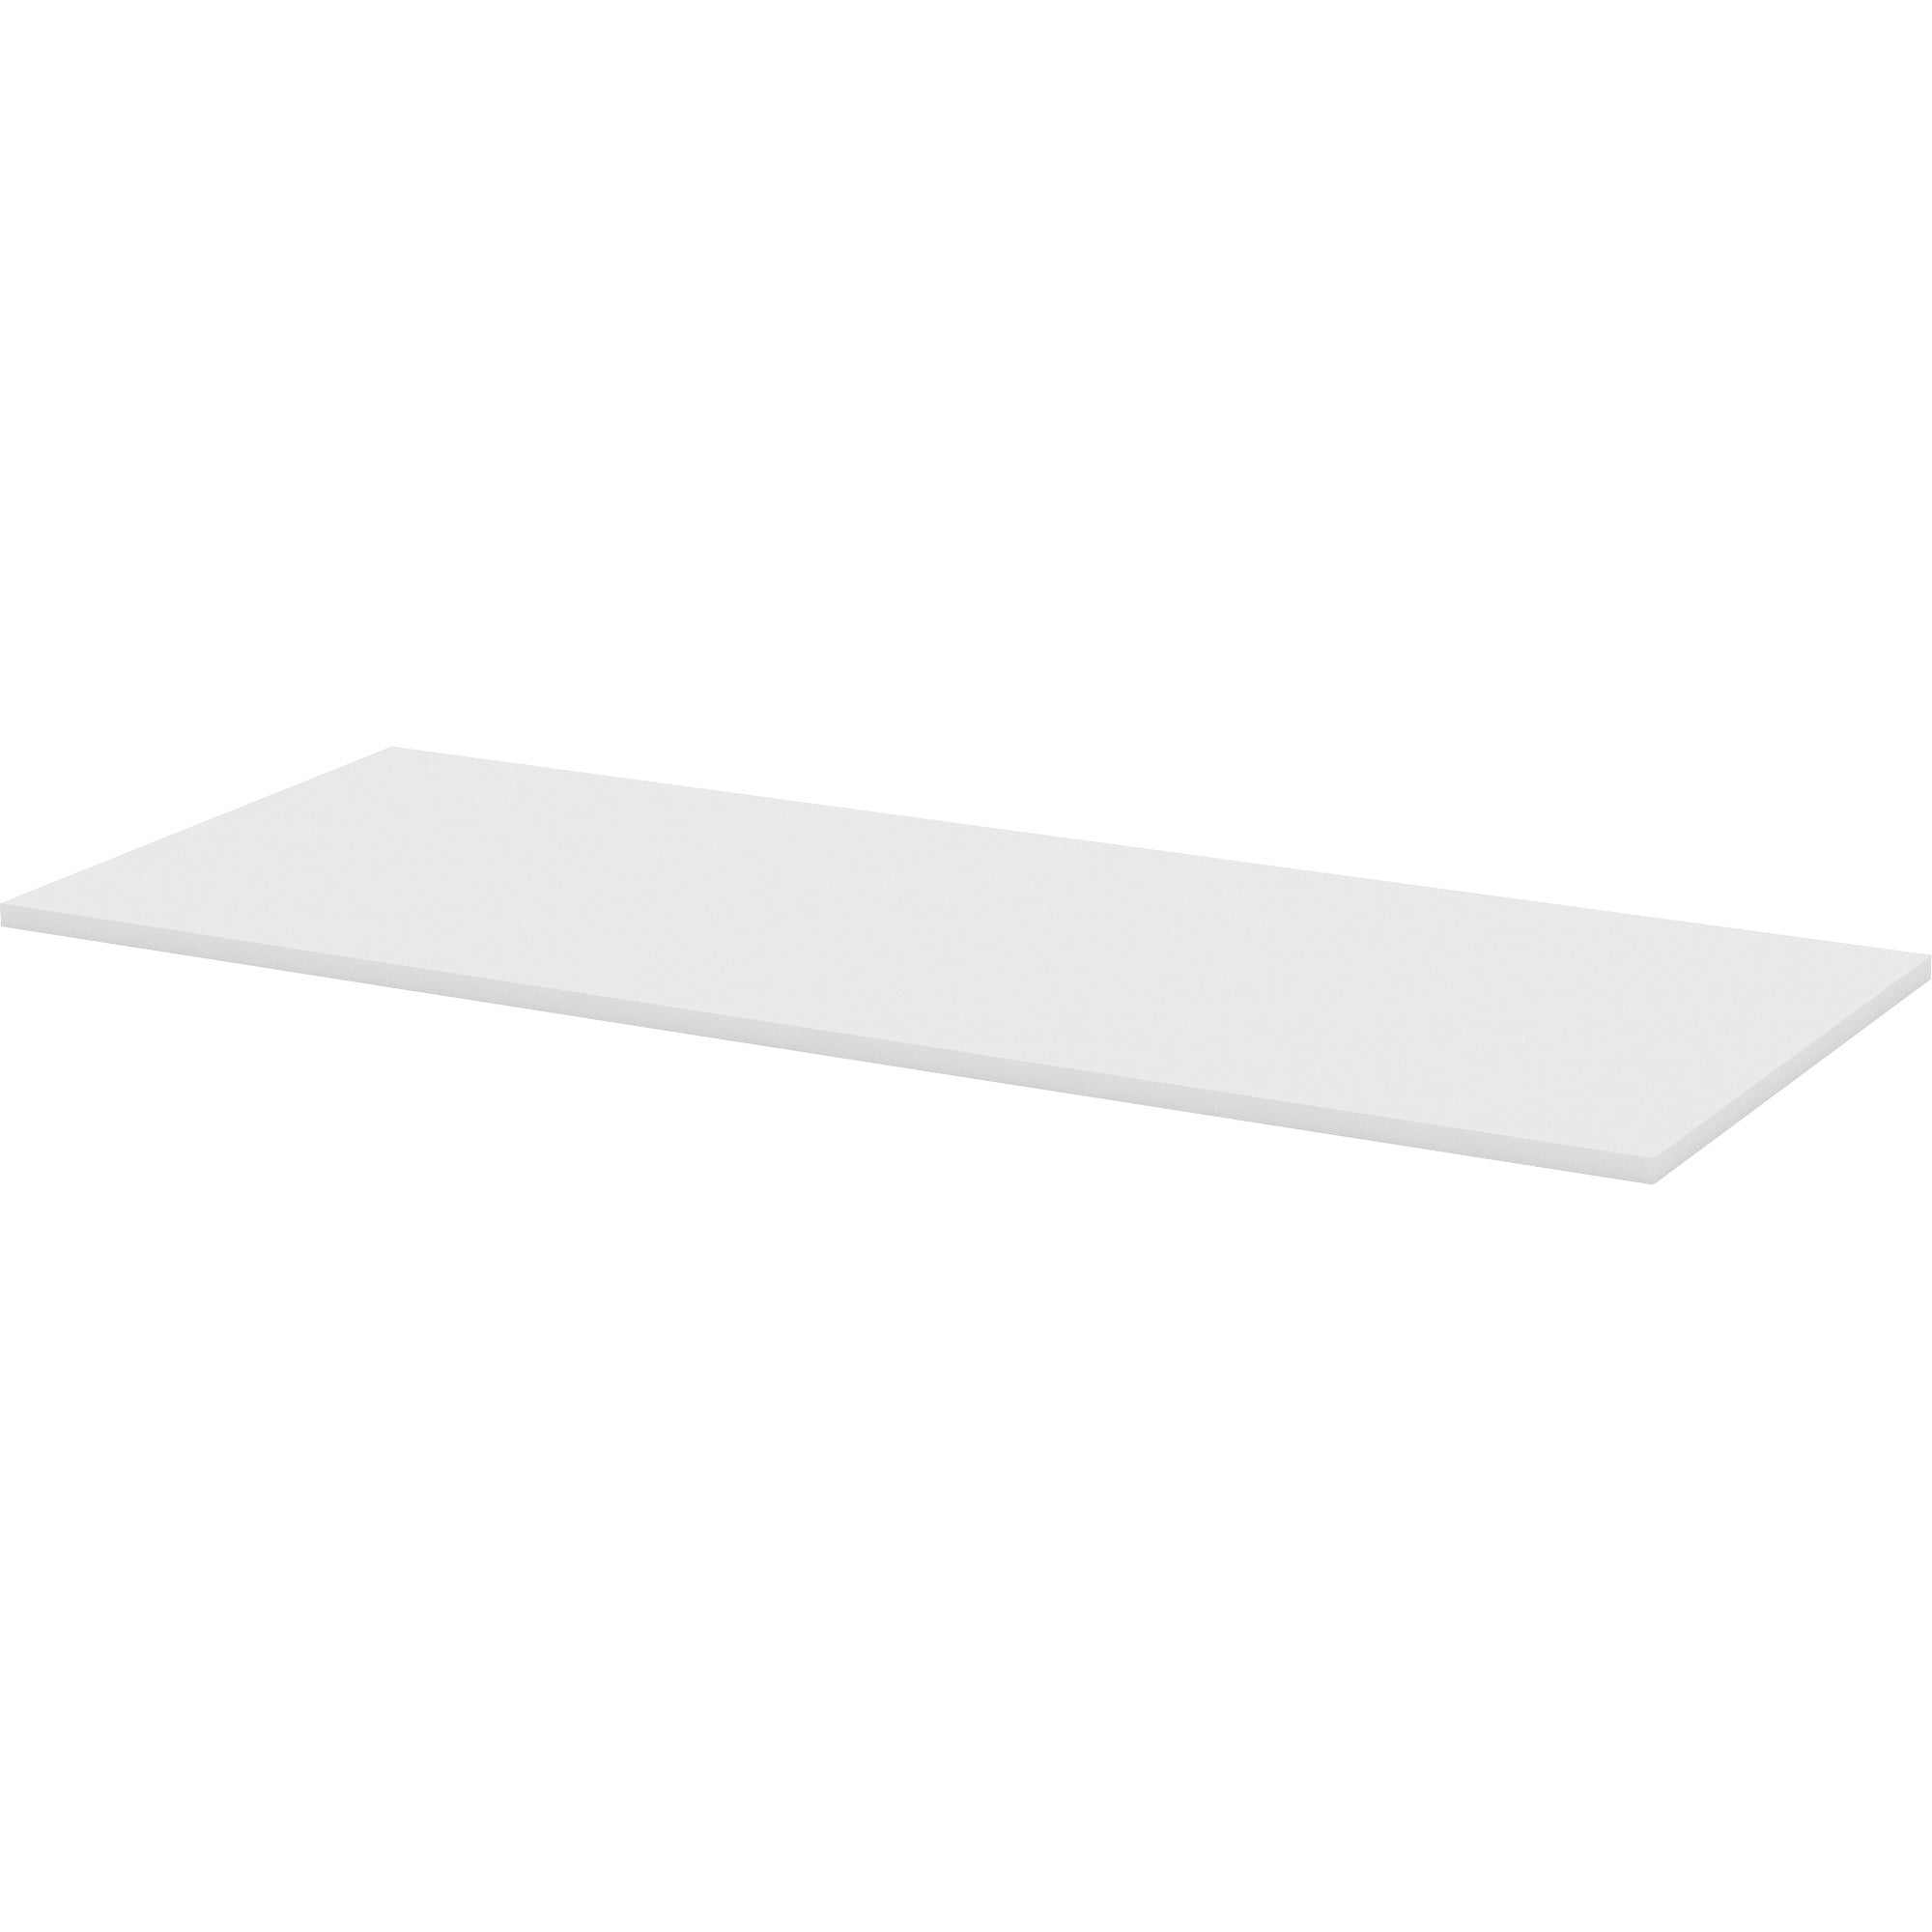 lorell-training-tabletop-for-table-topwhite-rectangle-top-72-table-top-length-x-30-table-top-width-x-1-table-top-thickness-assembly-required-1-each_llr62559 - 1